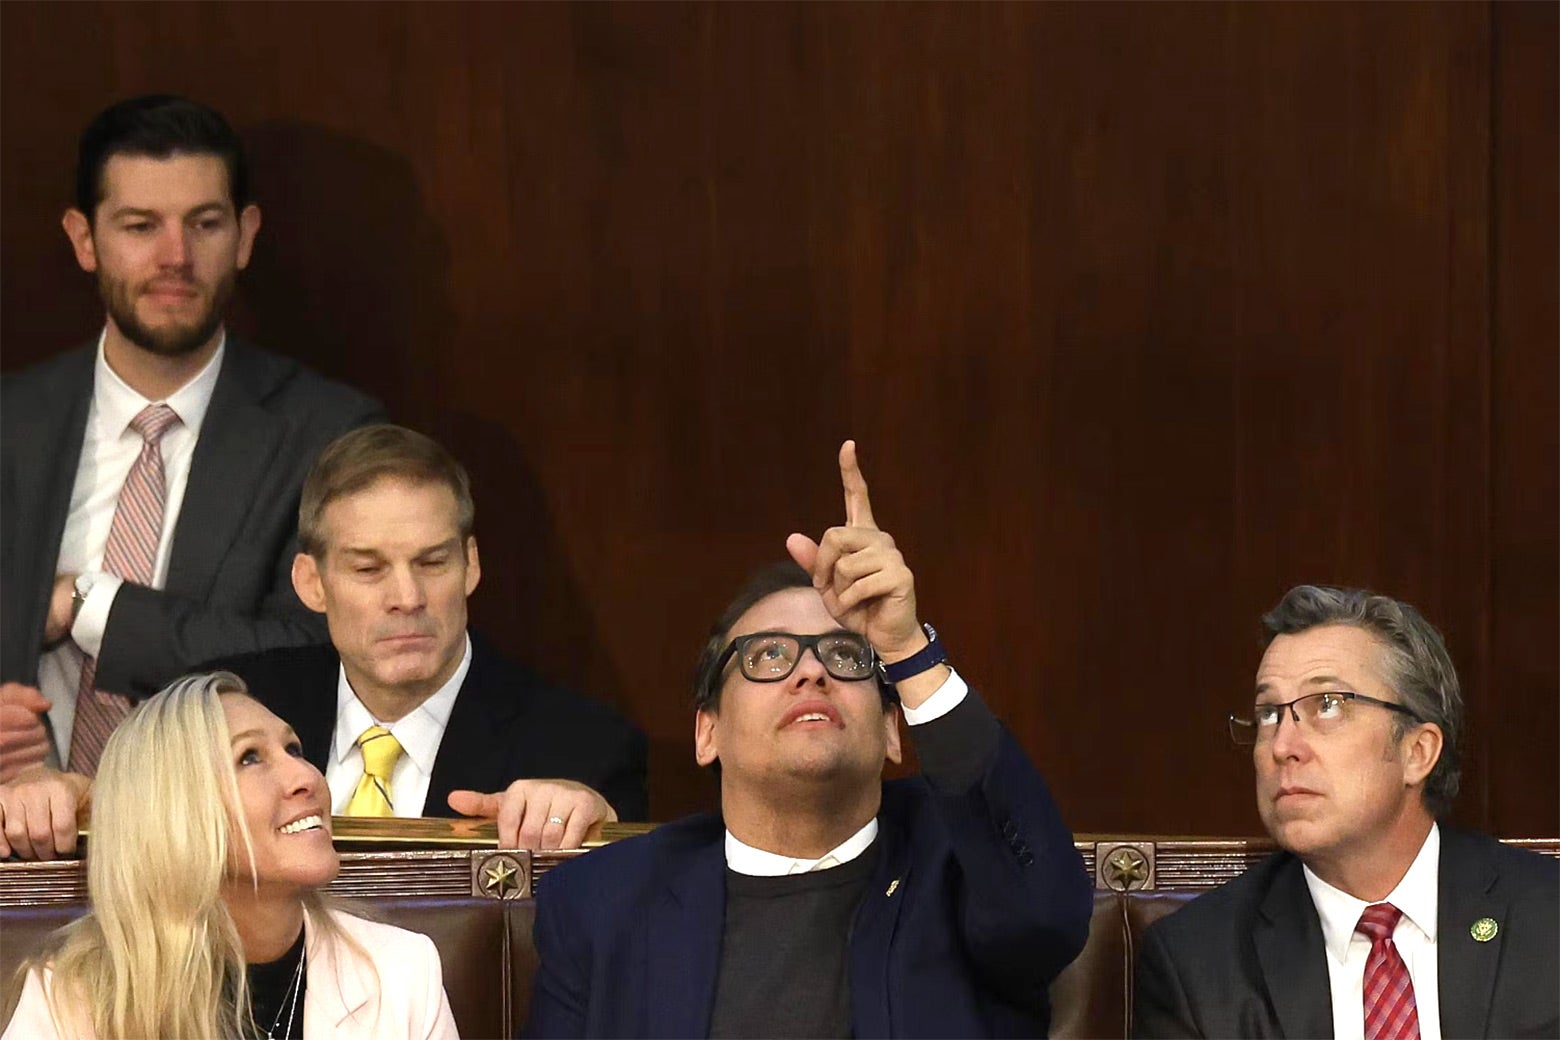 George Santos, sitting and pointing to the ceiling, is surrounded by Marjorie Taylor Greene, Any Ogles, and Jim Jordan.